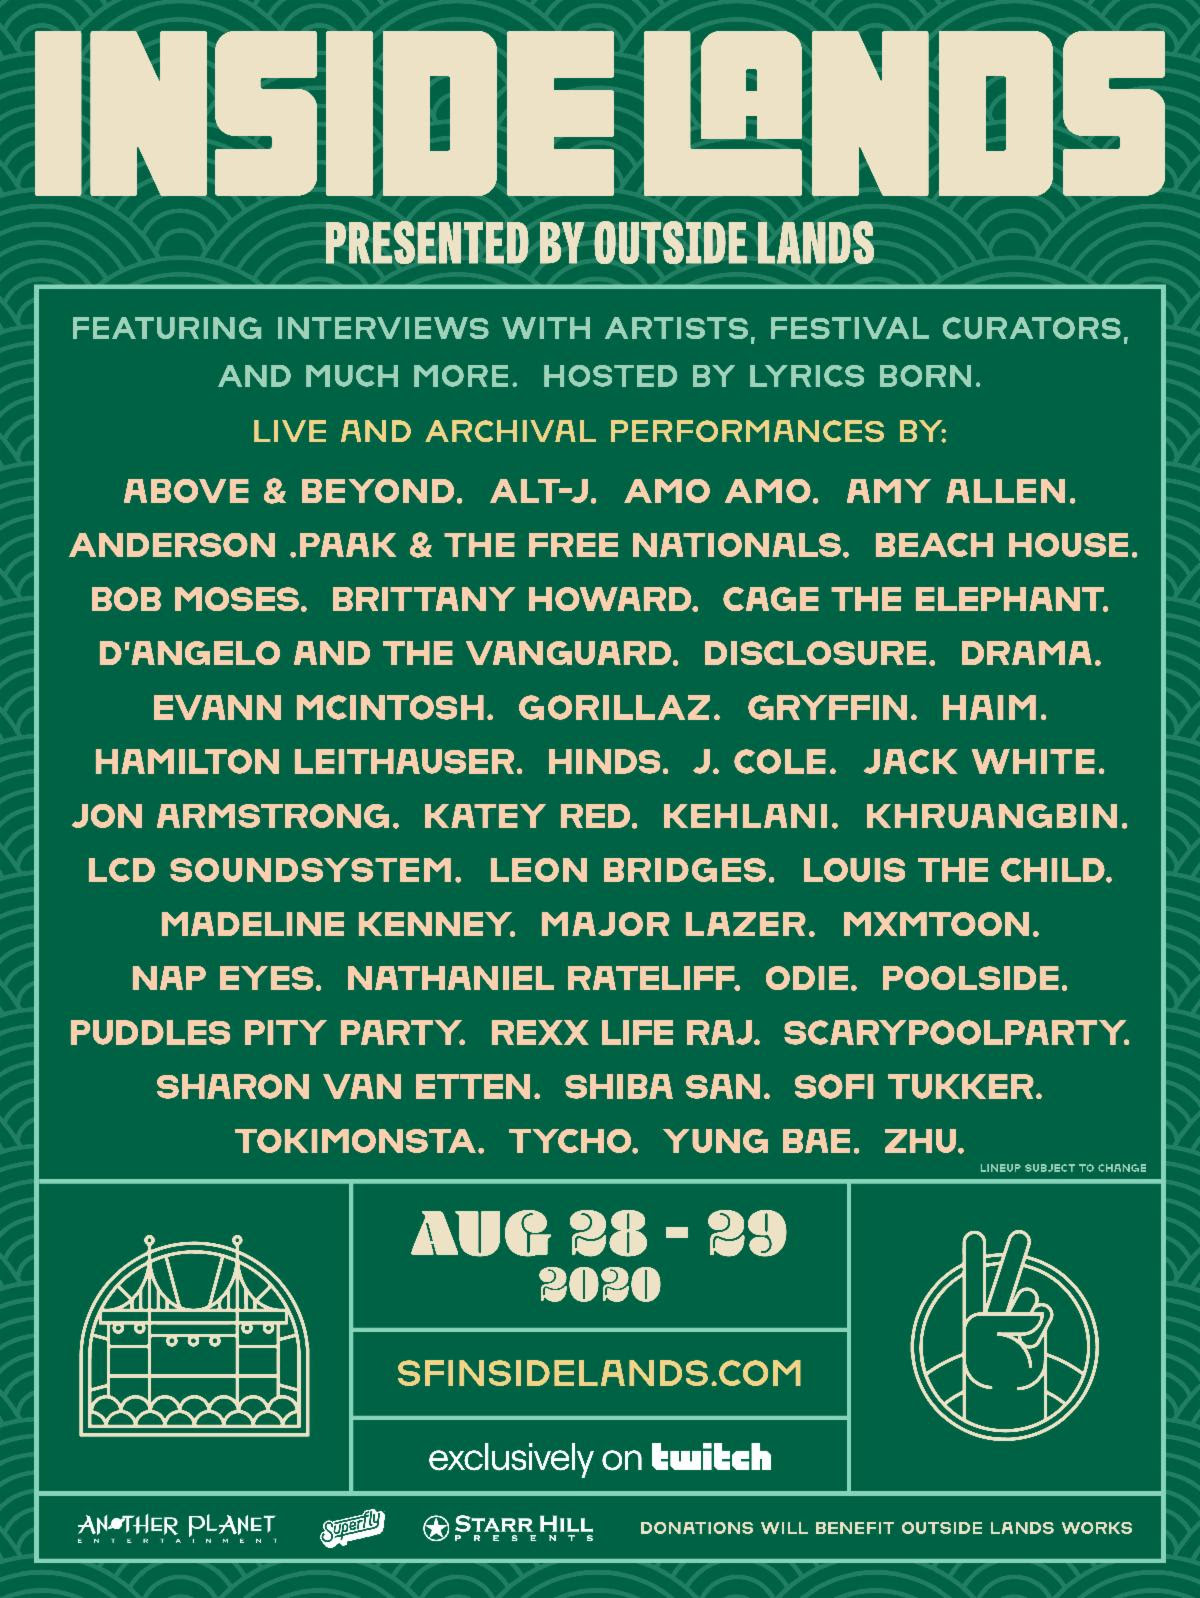 Outside Lands Announces Artist Lineup and Programming Details for